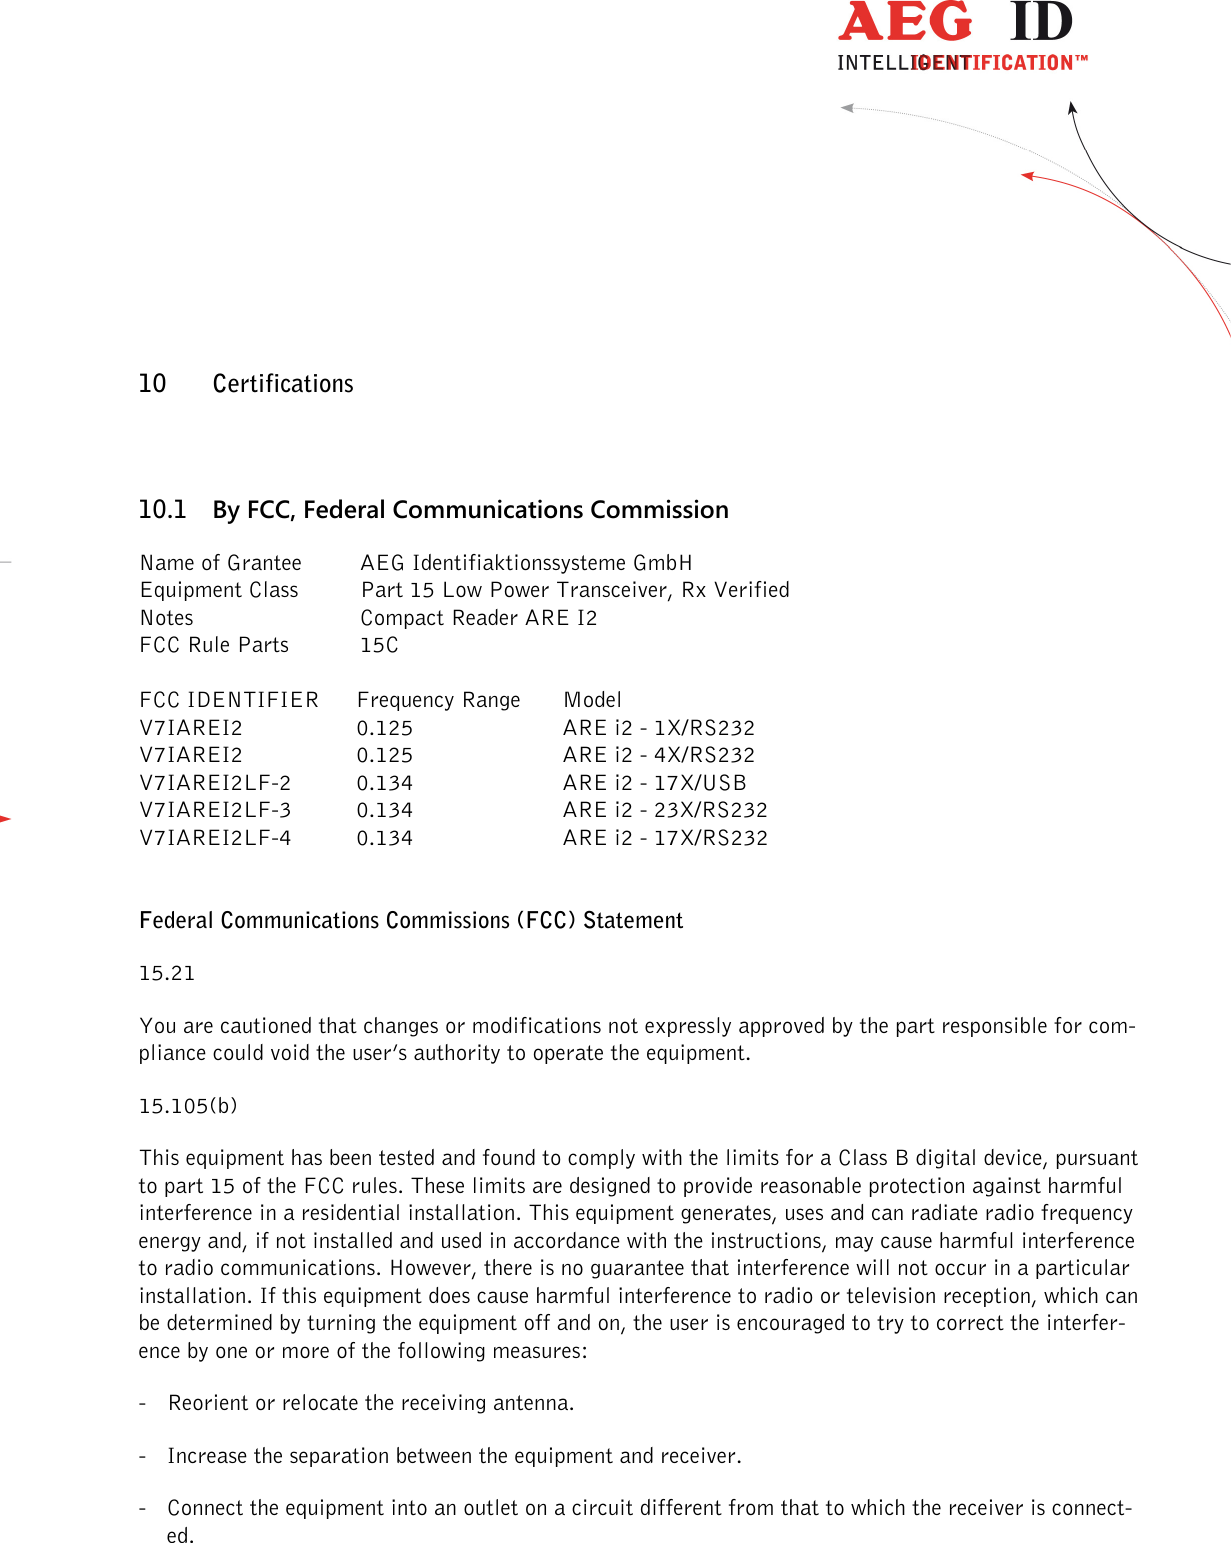                  --------------------------------------------------------------------------------30/32--------------------------------------------------------------------------------   10 Certifications 10.1 By FCC, Federal Communications Commission Name of Grantee  AEG Identifiaktionssysteme GmbH Equipment Class  Part 15 Low Power Transceiver, Rx Verified Notes      Compact Reader ARE I2 FCC Rule Parts  15C  FCC IDENTIFIER  Frequency Range  Model V7IAREI2  0.125  ARE i2 - 1X/RS232  V7IAREI2  0.125  ARE i2 - 4X/RS232 V7IAREI2LF-2  0.134  ARE i2 - 17X/USB V7IAREI2LF-3  0.134  ARE i2 - 23X/RS232 V7IAREI2LF-4  0.134  ARE i2 - 17X/RS232   Federal Communications Commissions (FCC) Statement 15.21 You are cautioned that changes or modifications not expressly approved by the part responsible for com-pliance could void the user’s authority to operate the equipment. 15.105(b) This equipment has been tested and found to comply with the limits for a Class B digital device, pursuant to part 15 of the FCC rules. These limits are designed to provide reasonable protection against harmful interference in a residential installation. This equipment generates, uses and can radiate radio frequency energy and, if not installed and used in accordance with the instructions, may cause harmful interference to radio communications. However, there is no guarantee that interference will not occur in a particular installation. If this equipment does cause harmful interference to radio or television reception, which can be determined by turning the equipment off and on, the user is encouraged to try to correct the interfer-ence by one or more of the following measures: - Reorient or relocate the receiving antenna. - Increase the separation between the equipment and receiver. - Connect the equipment into an outlet on a circuit different from that to which the receiver is connect-ed. 